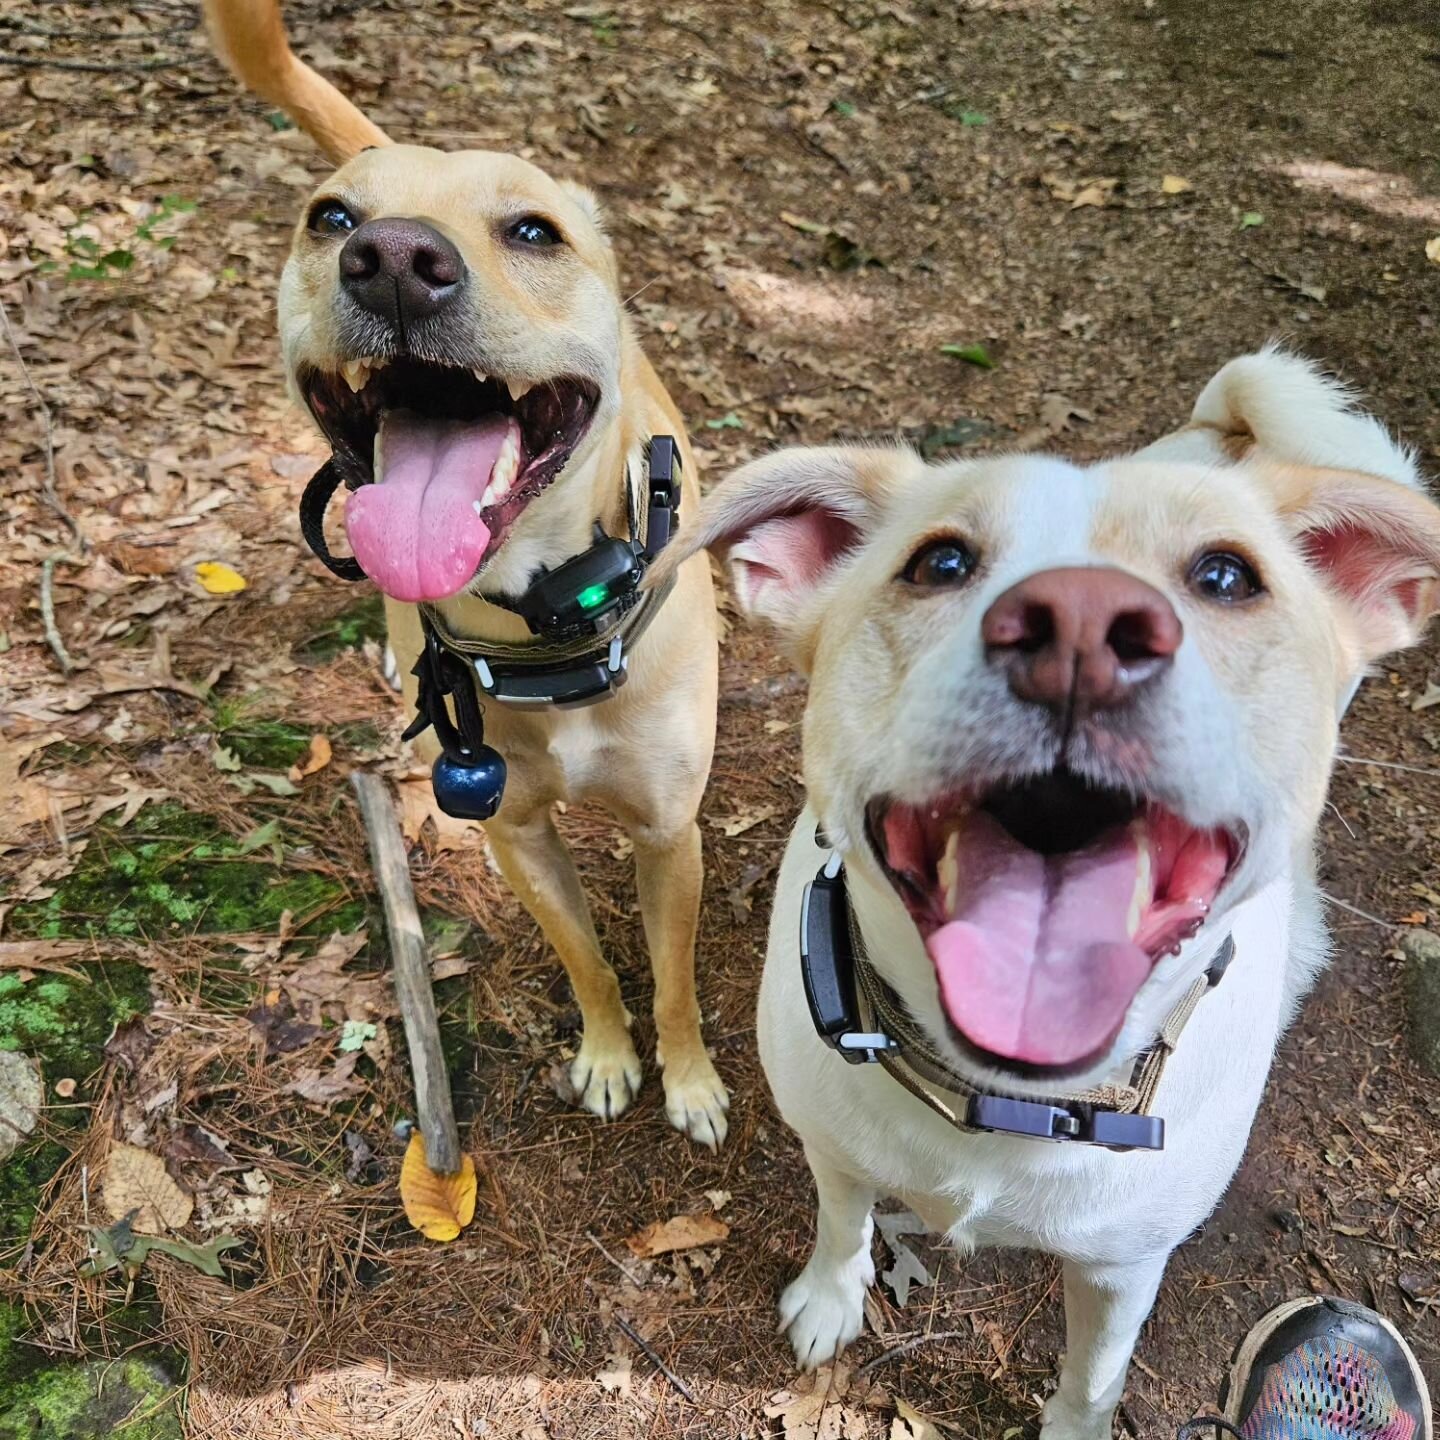 Brotherly Love 🐶🥰🐶
Rico &amp; Mateo love exploring the woods together and attacking me with kisses 💋